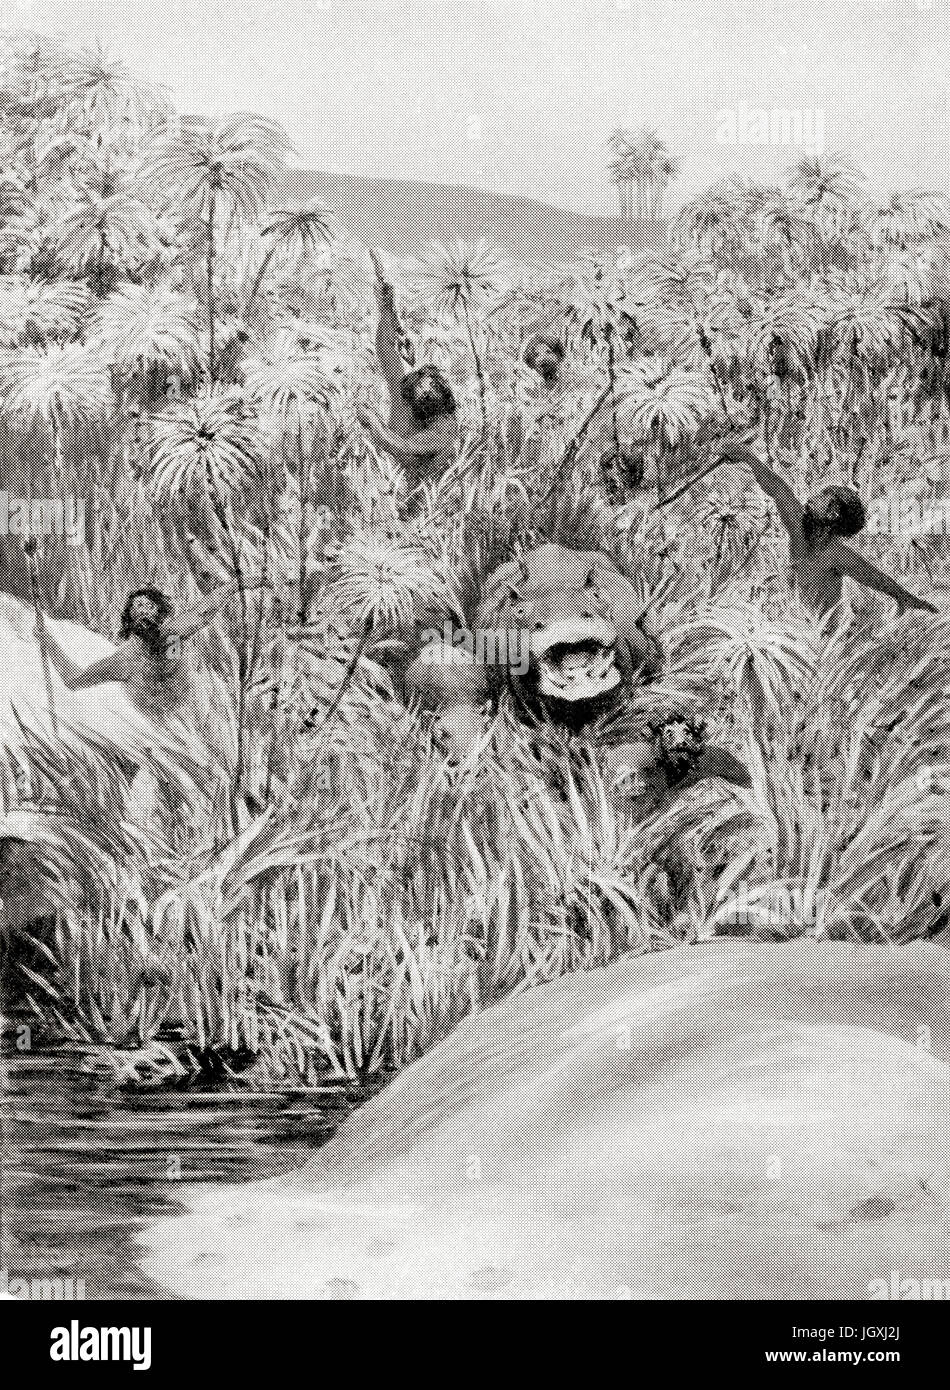 Early Egyptians hunting hippopotamus.   From Hutchinson's History of the Nations, published 1915. Stock Photo